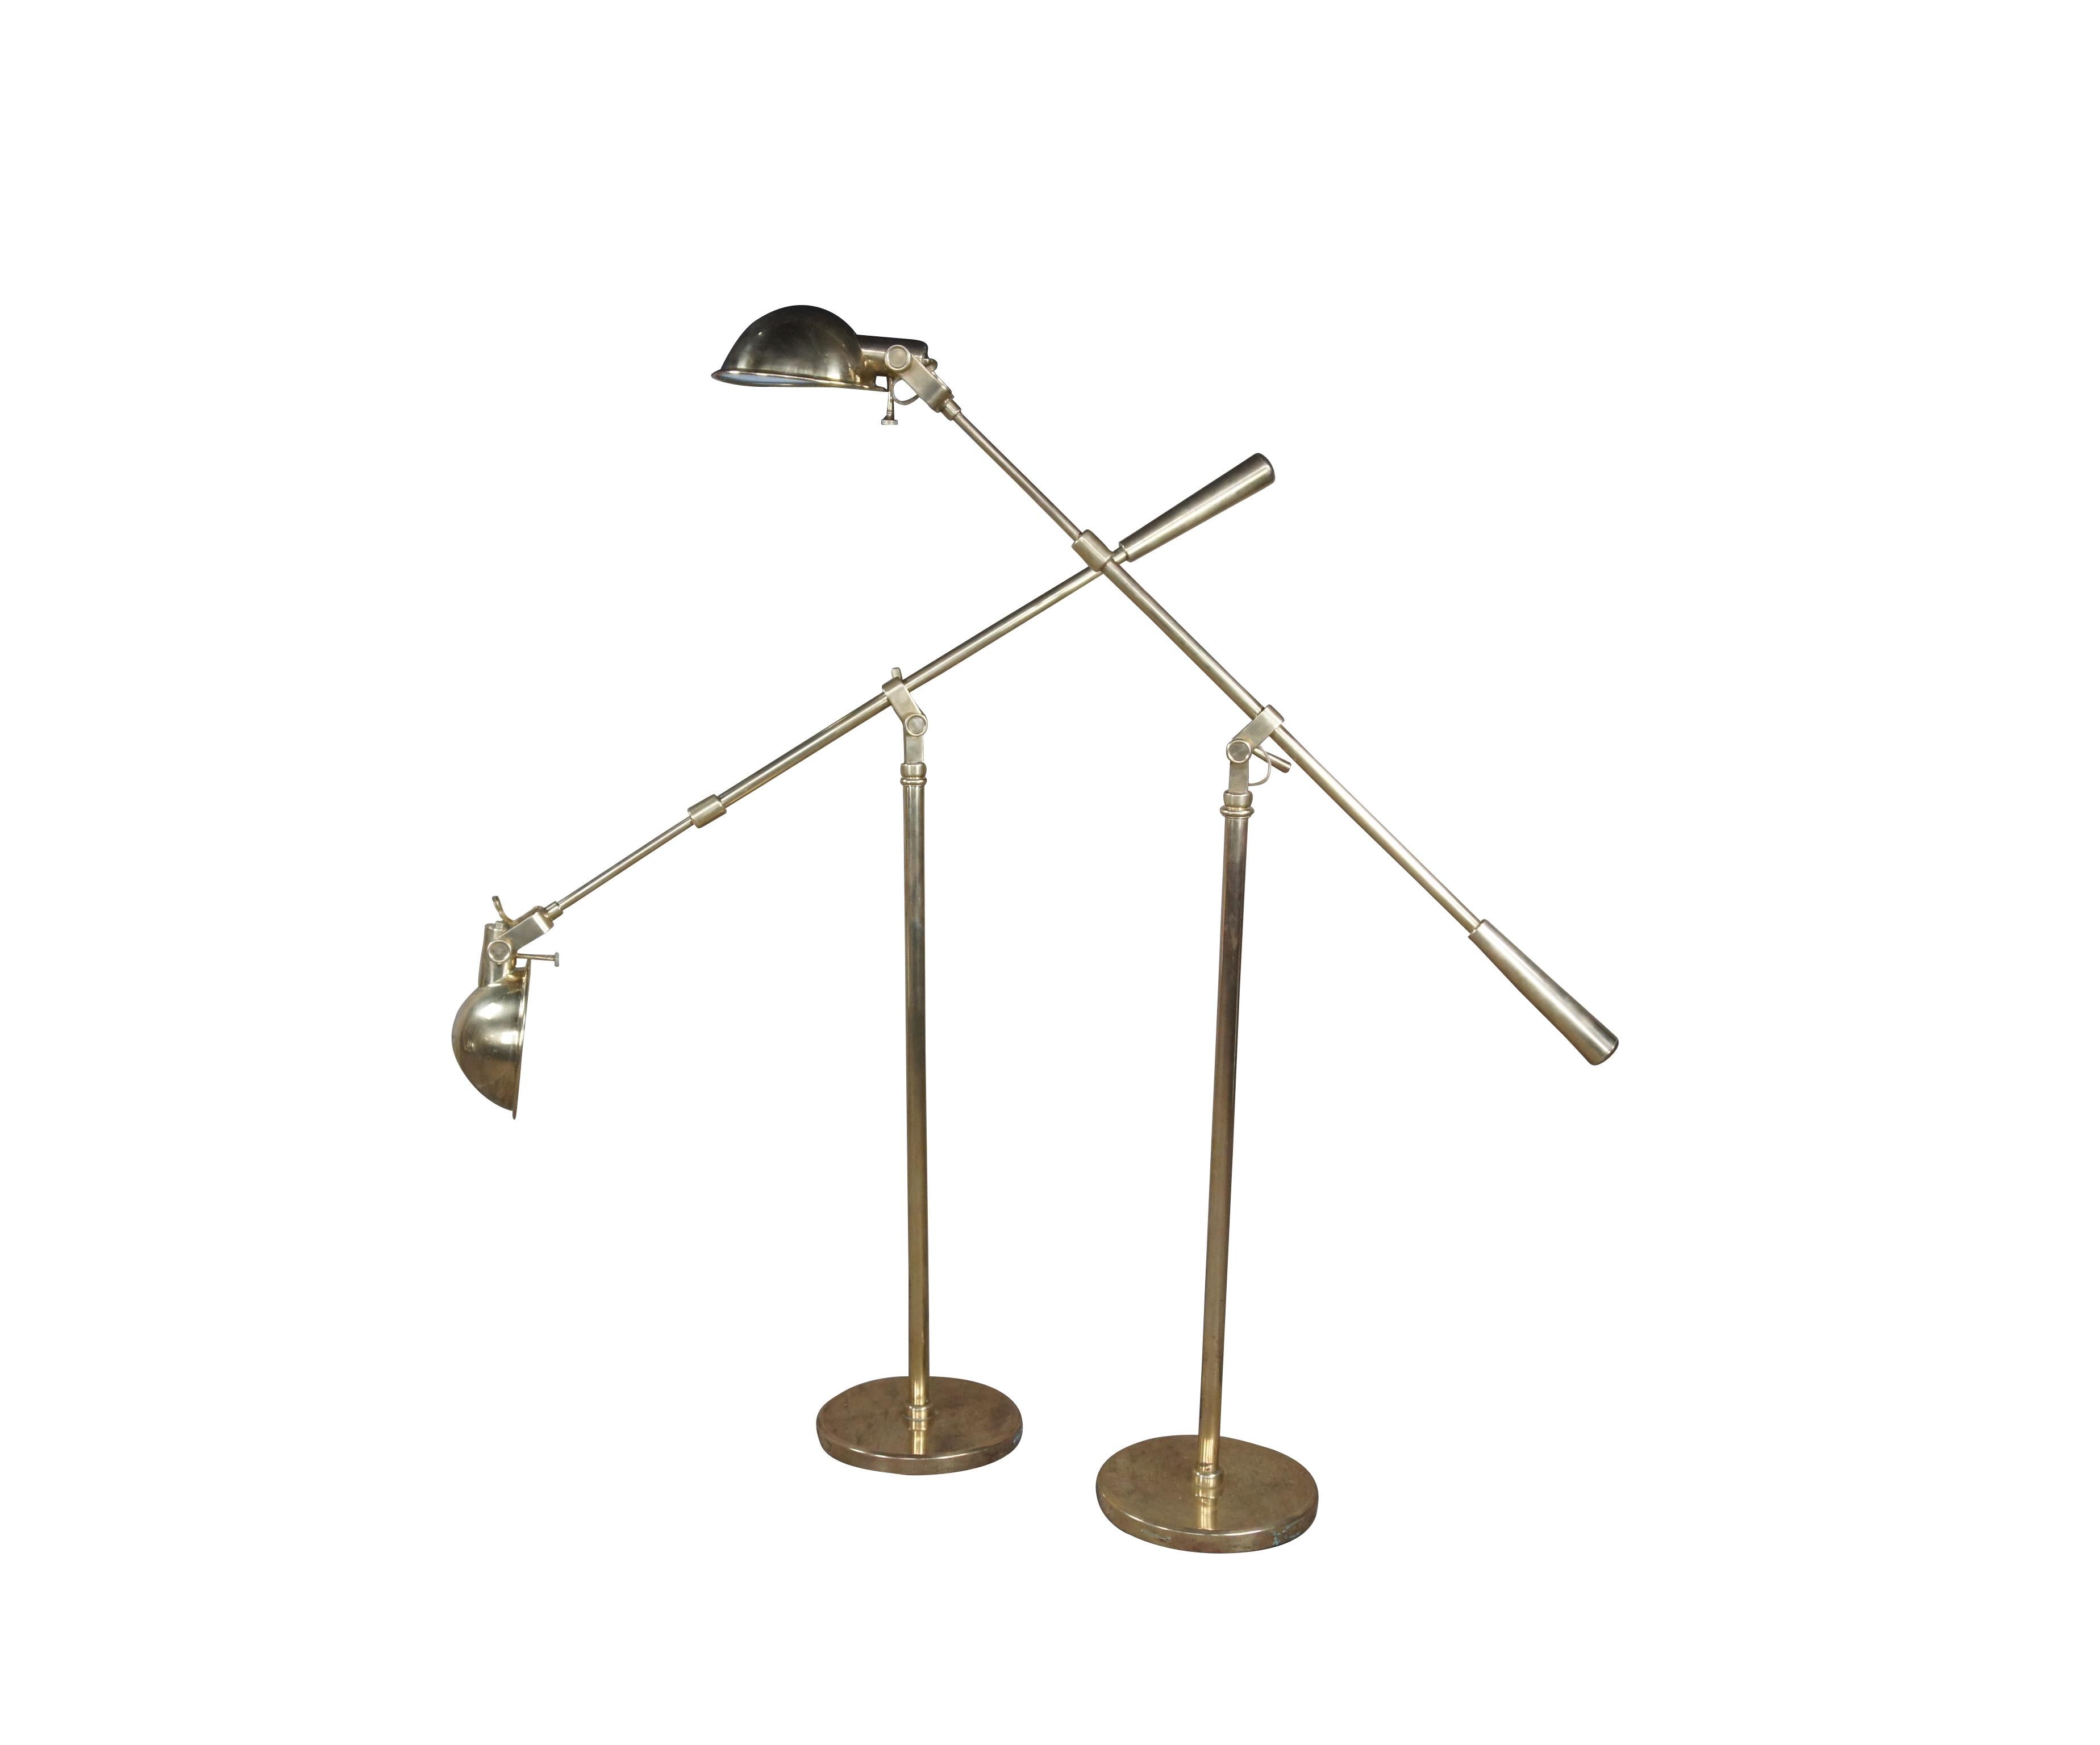 2 Vintage Ralph Lauren Boom Arm Pharmacy Reading Floor Lamps Brass Pair In Good Condition In Dayton, OH